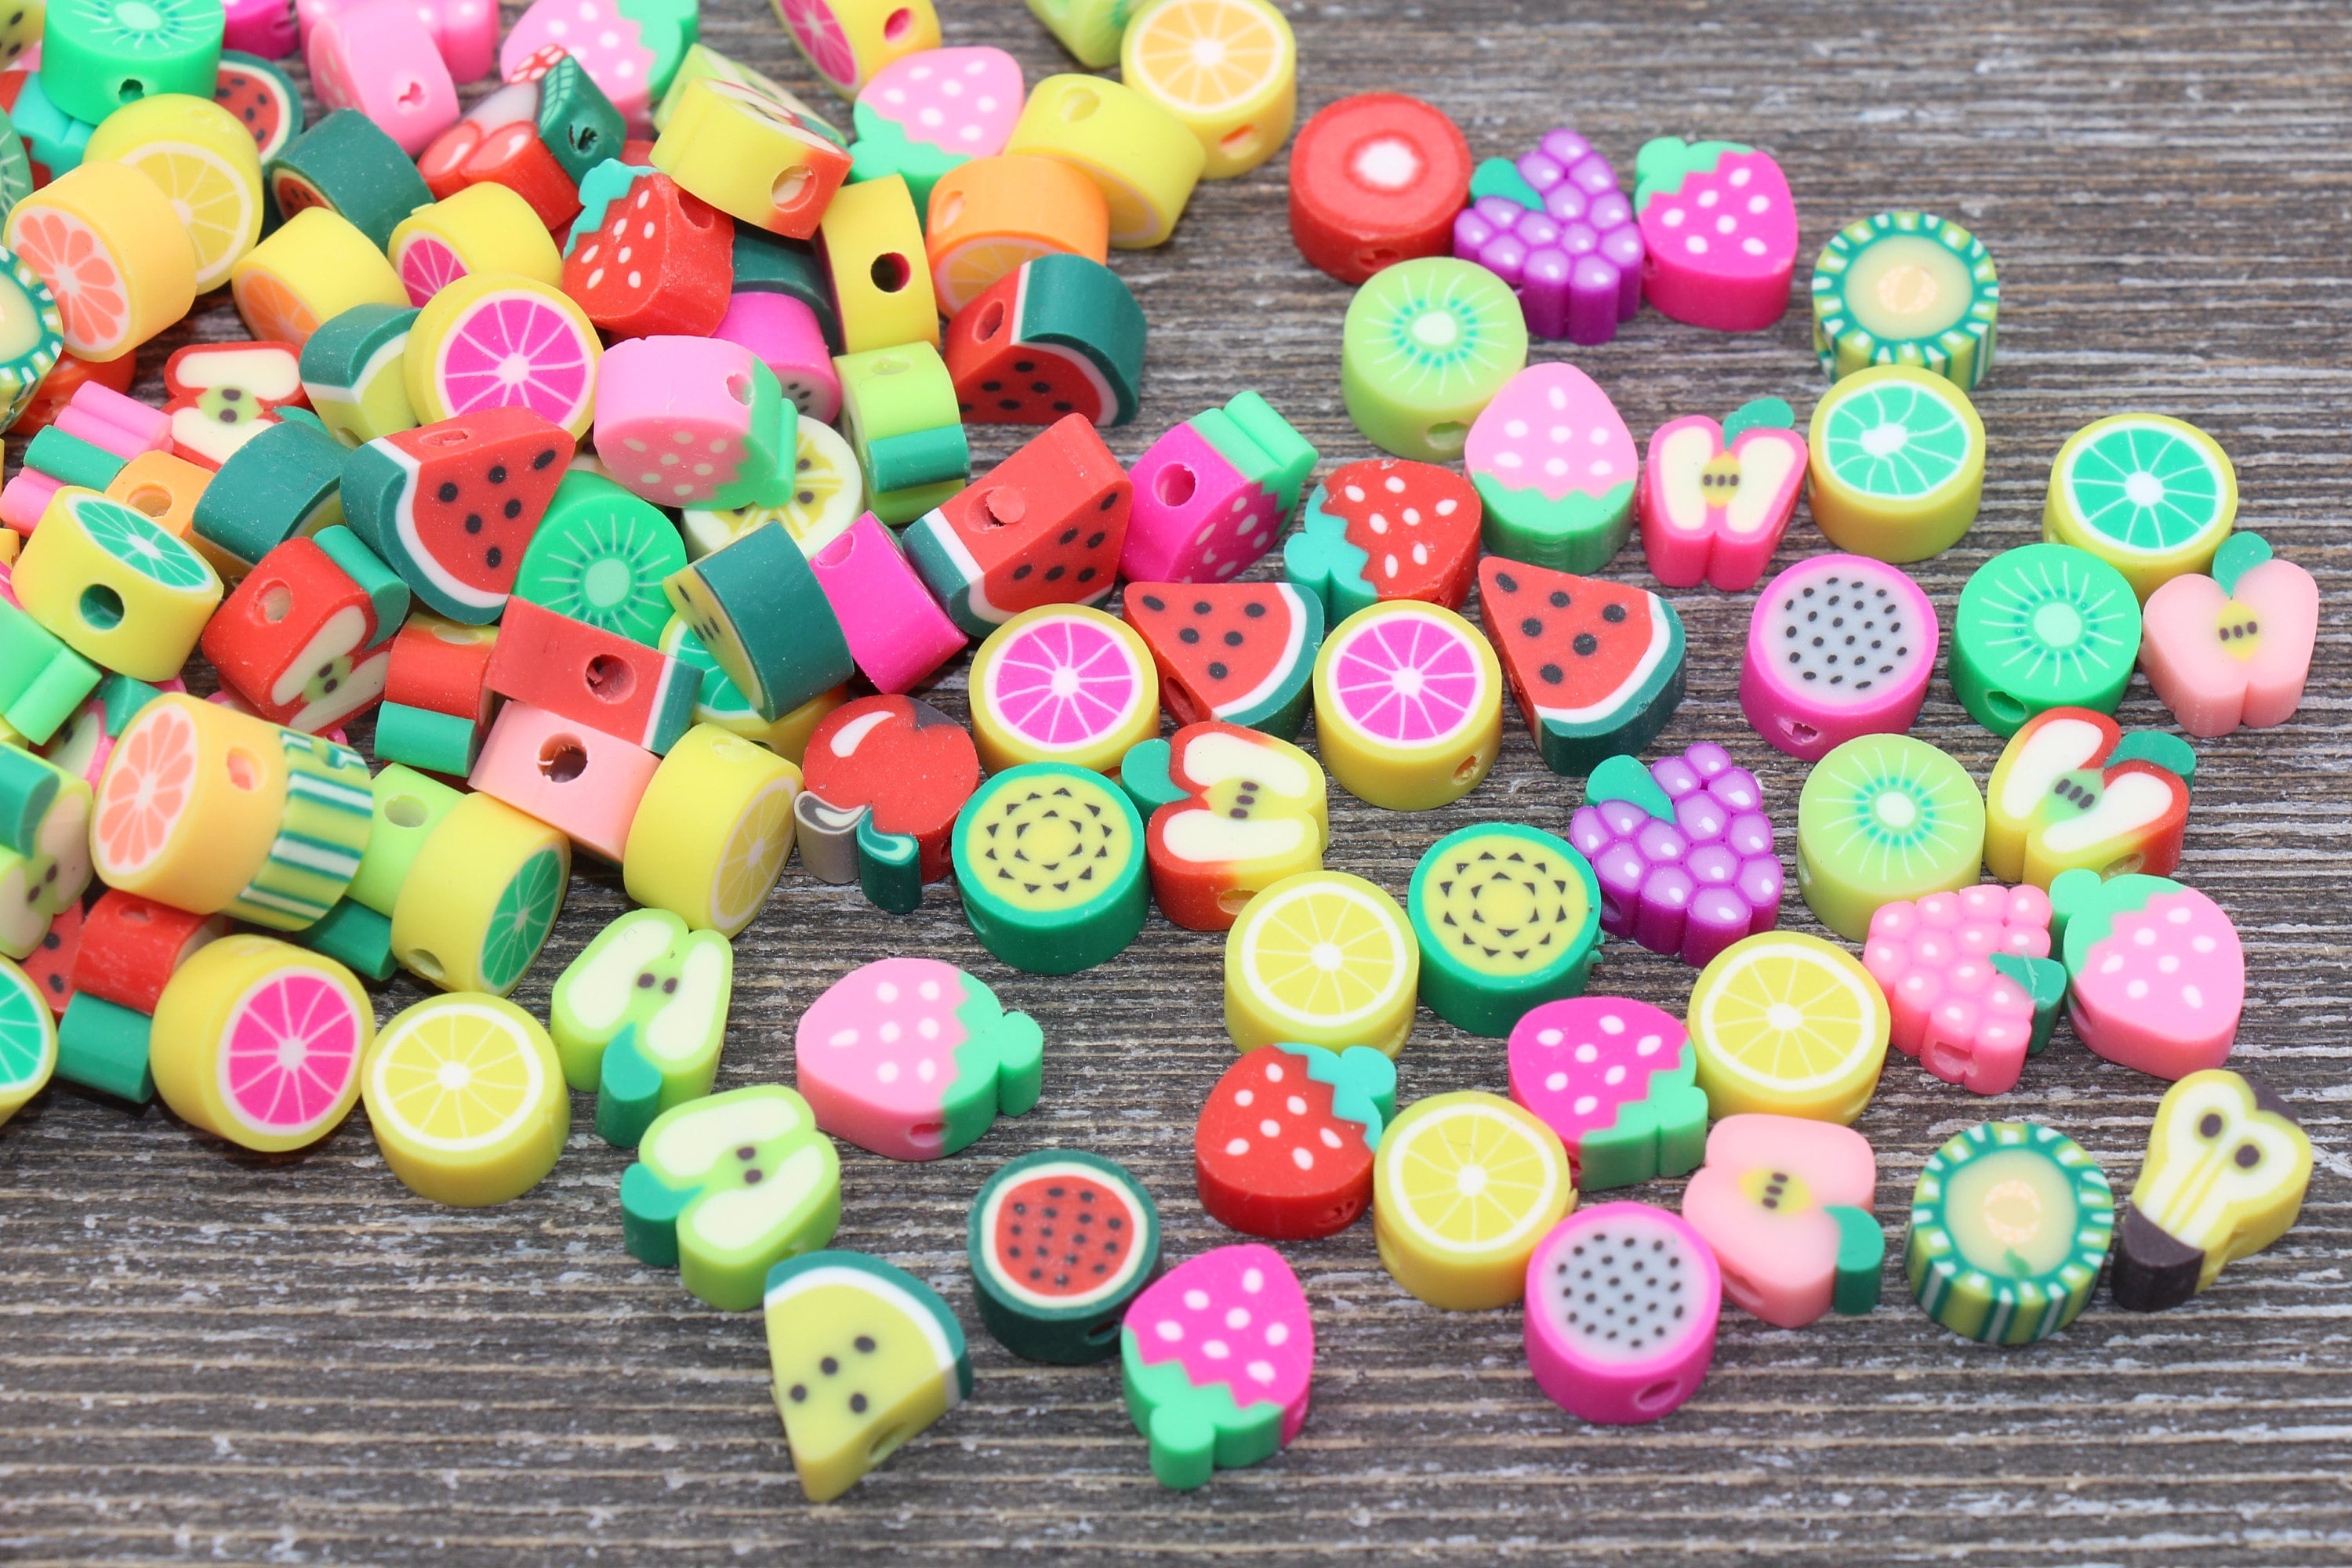 Fruit Polymer Clay Slices (Big) | Vegetable Fimo Clay Cane Slices |  Miniature Food & Resin Art (100pcs by Random)